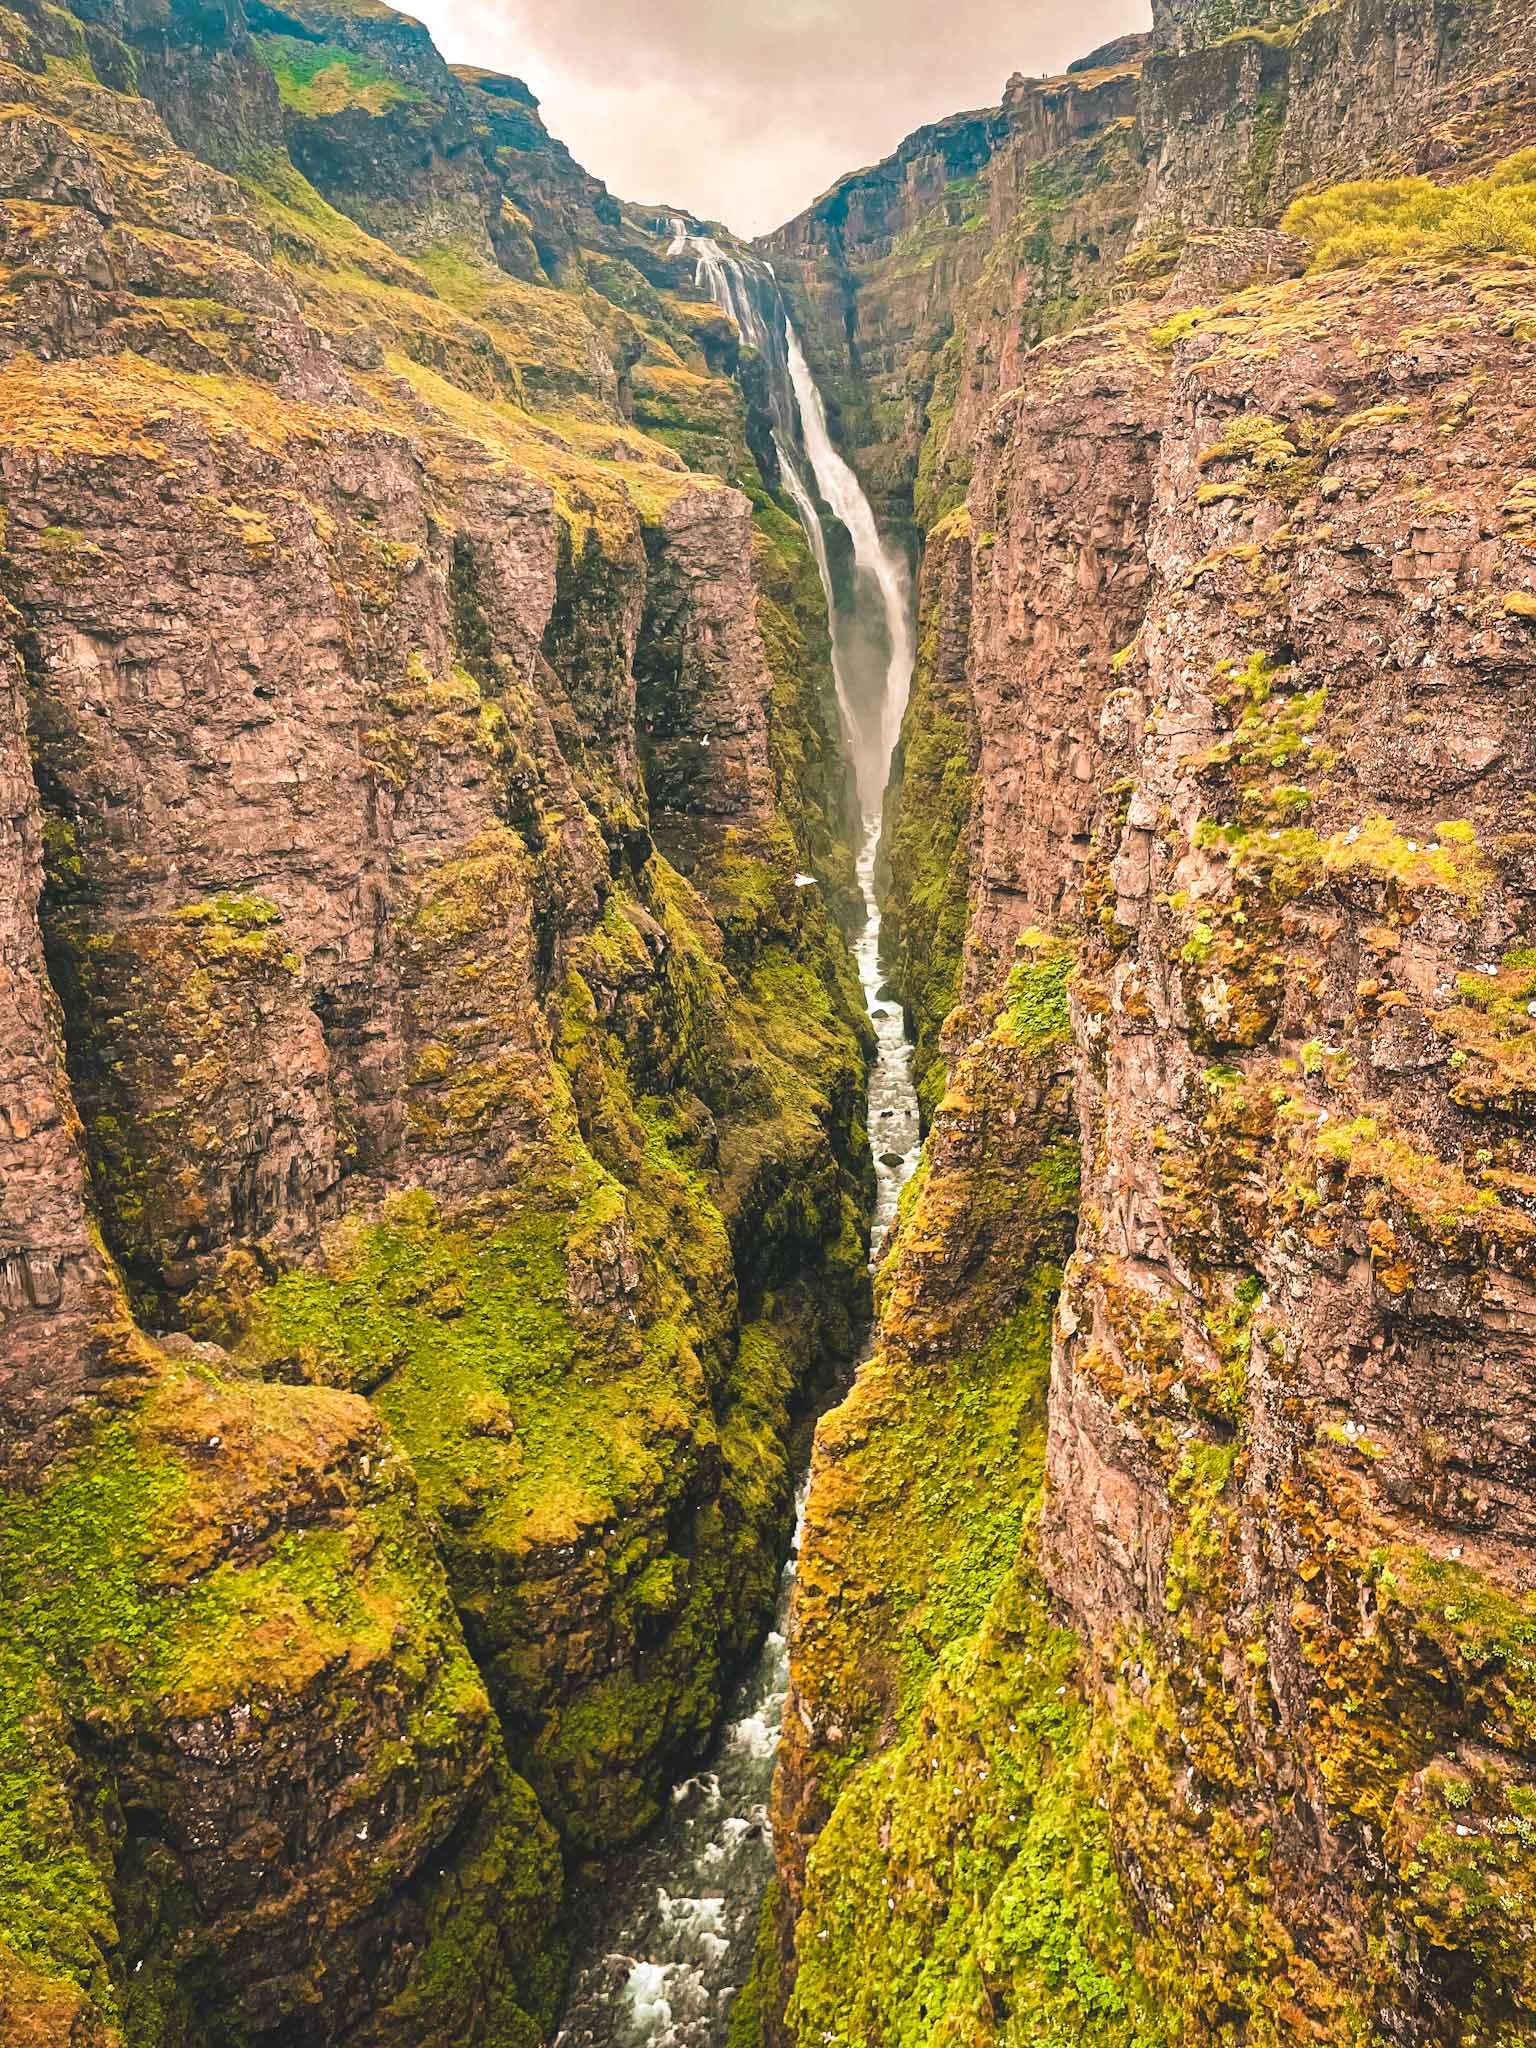 The famous Glymur waterfall in Iceland